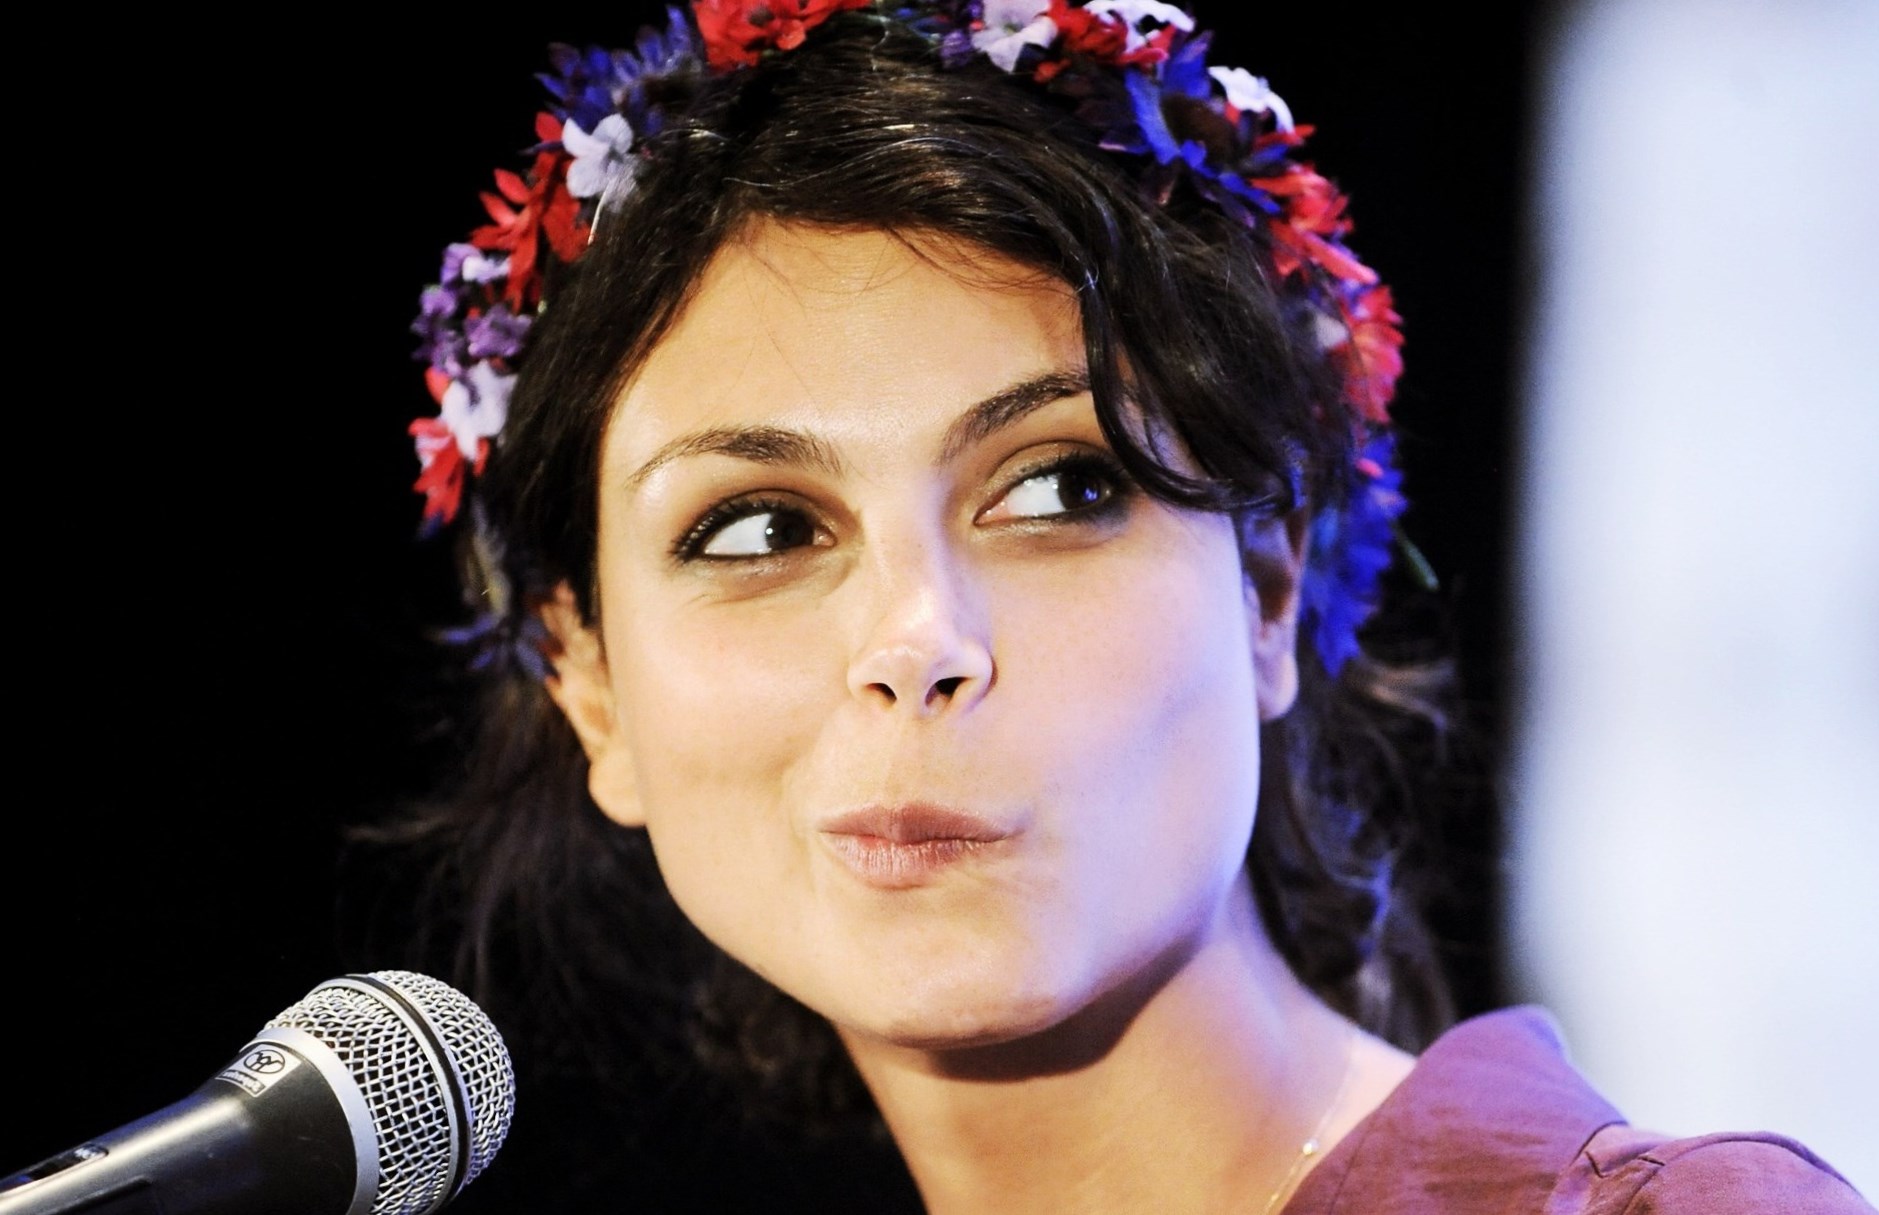 Morena Baccarin weight, height and age. We know it all!